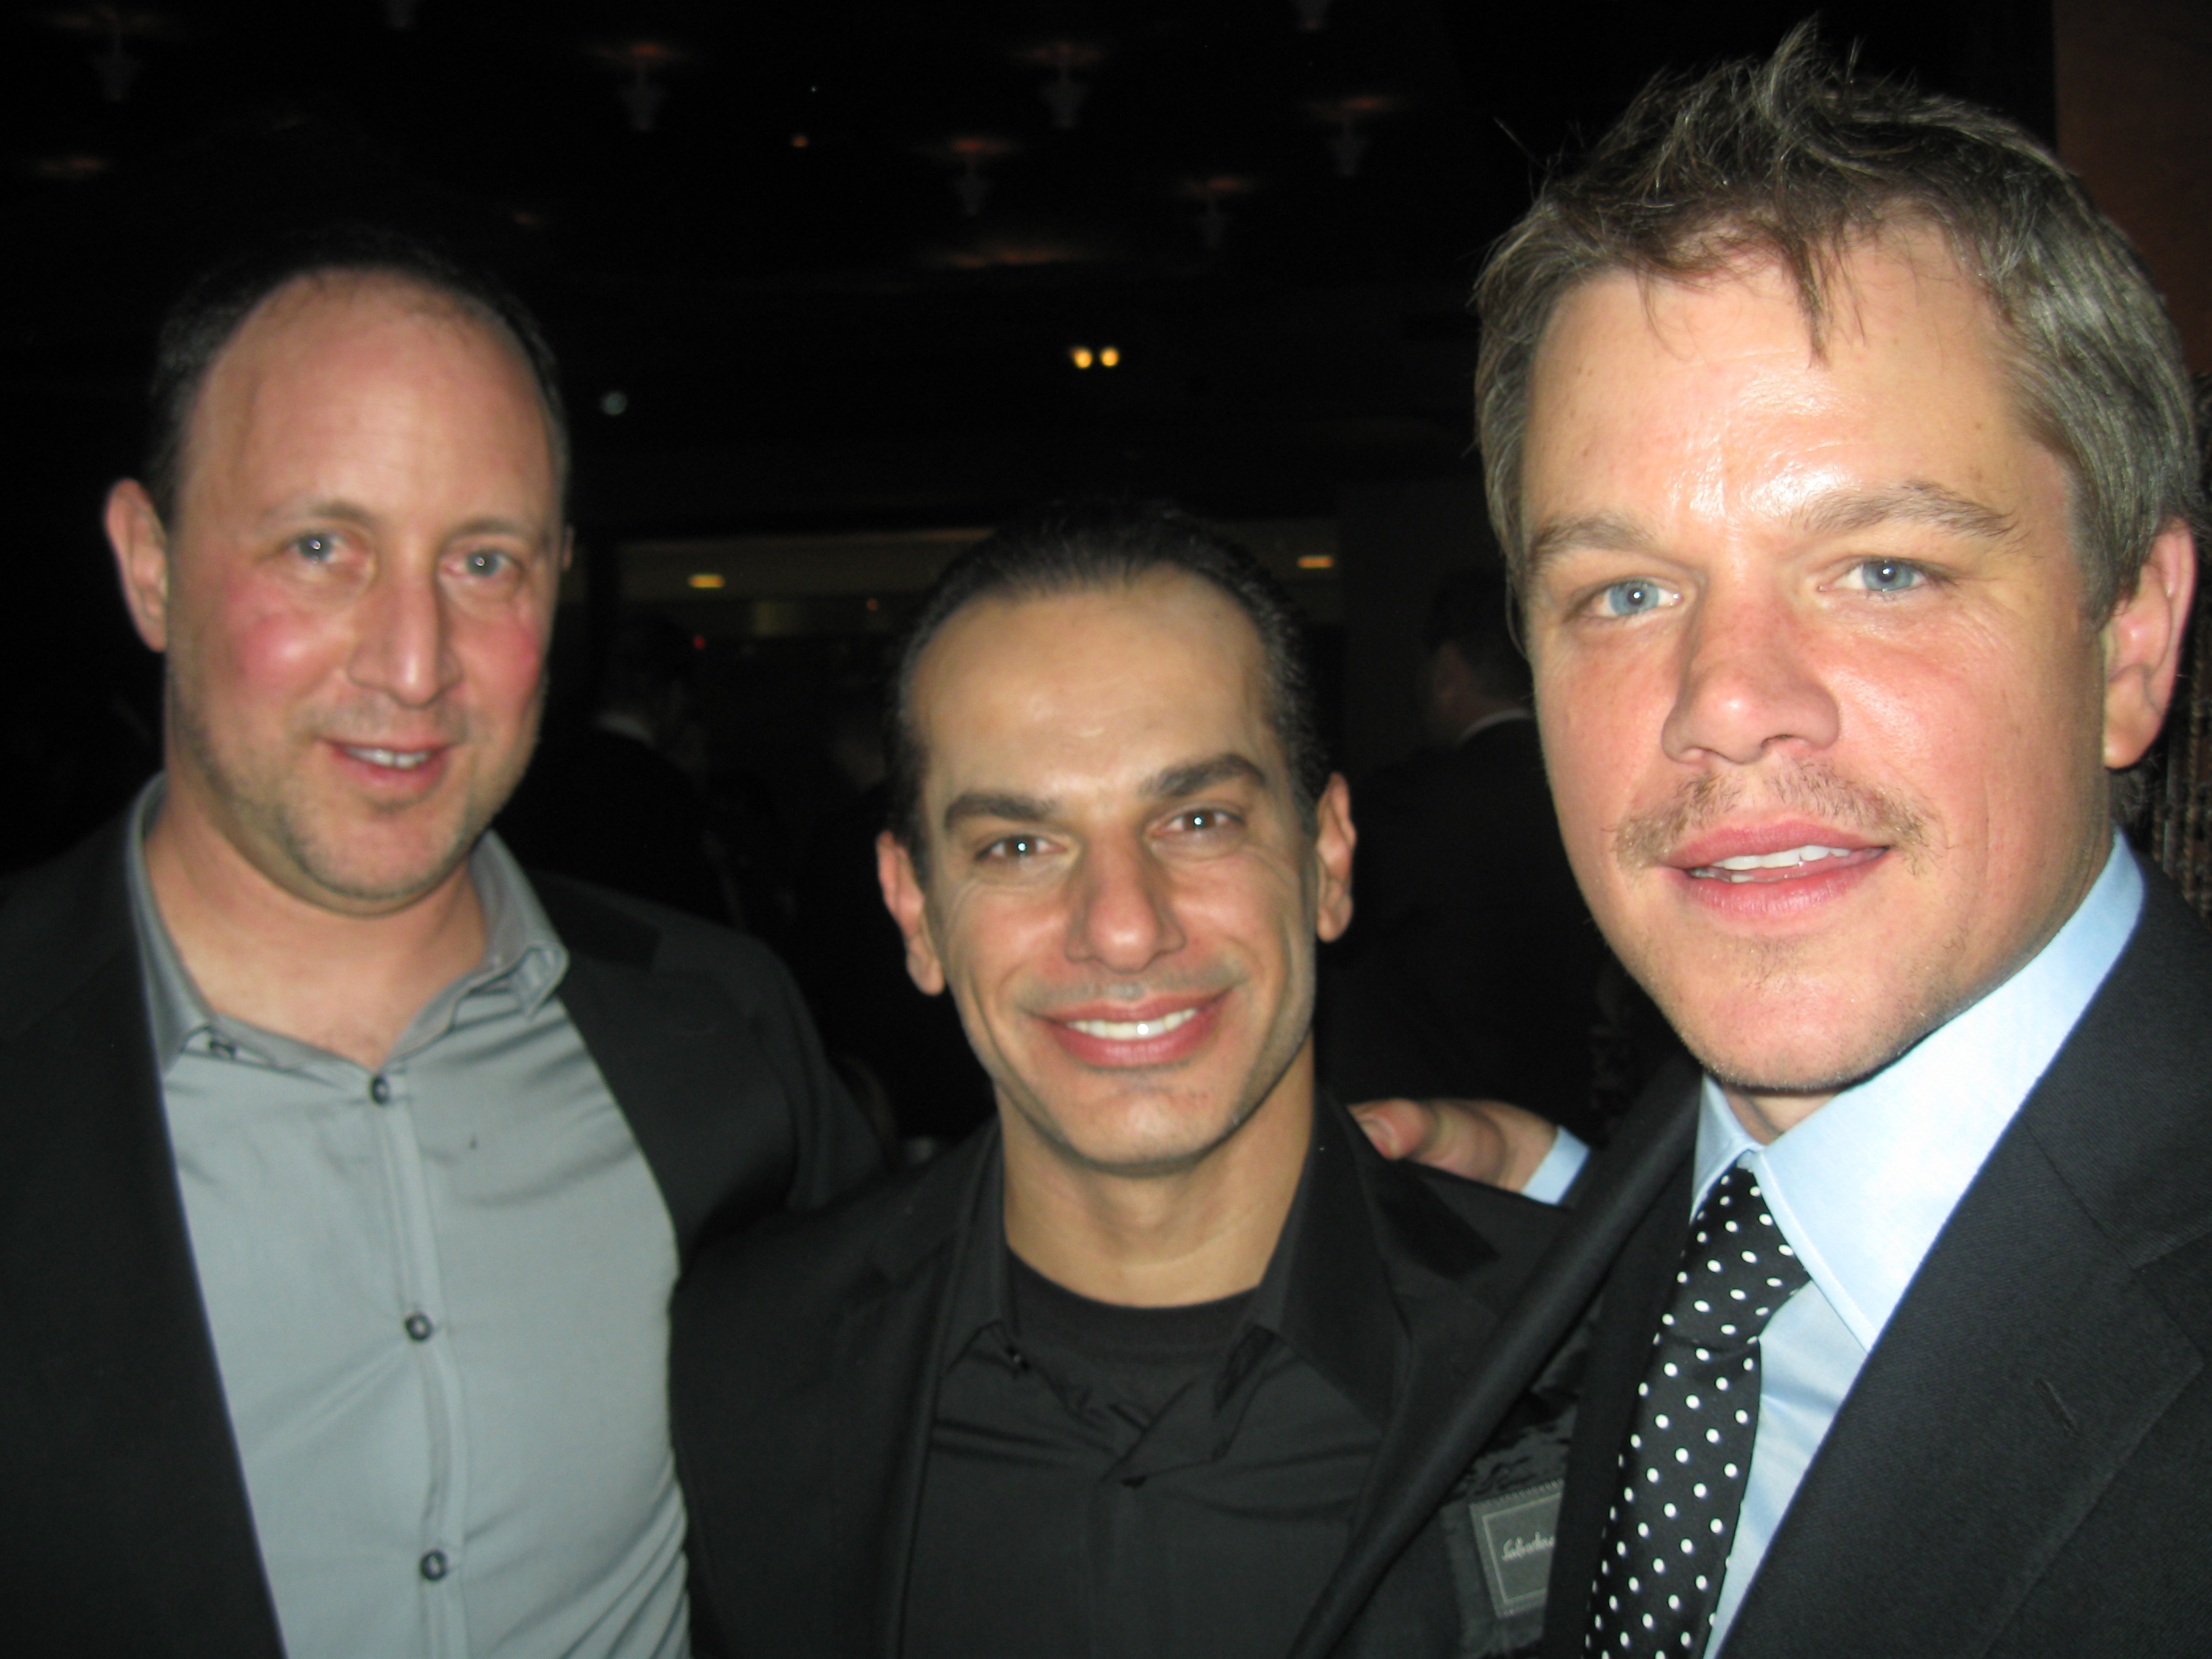 With my Friend Matt Damon and one of the Producers Michael Bronner at the Premiere of Green Zone Feb. 2010